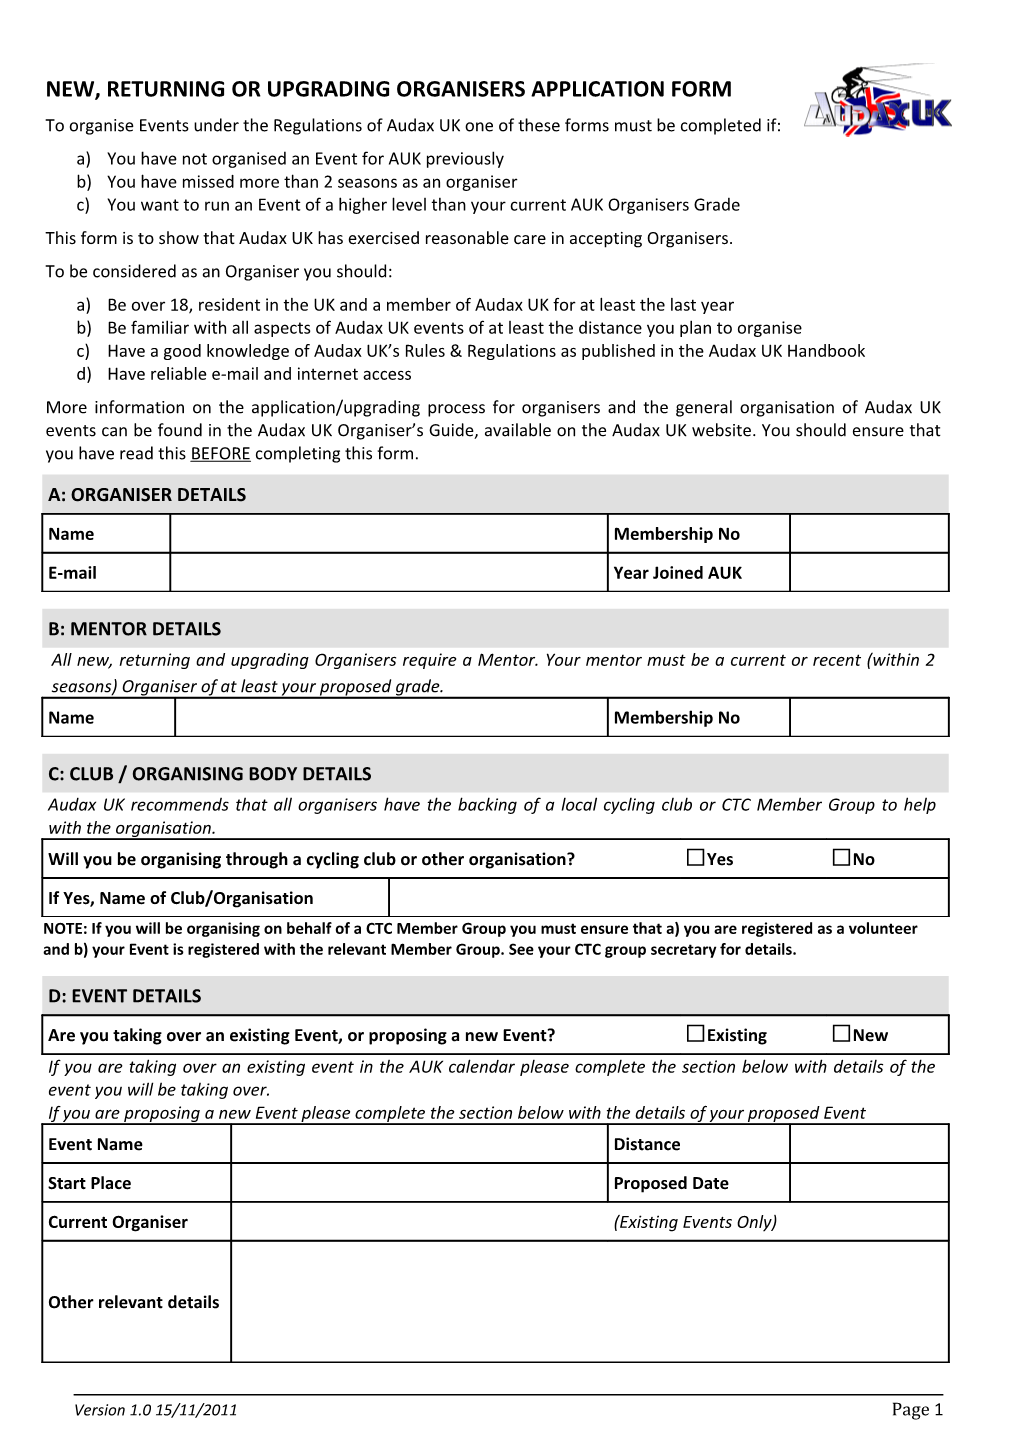 New, Returning Or Upgrading Organisers Application Form